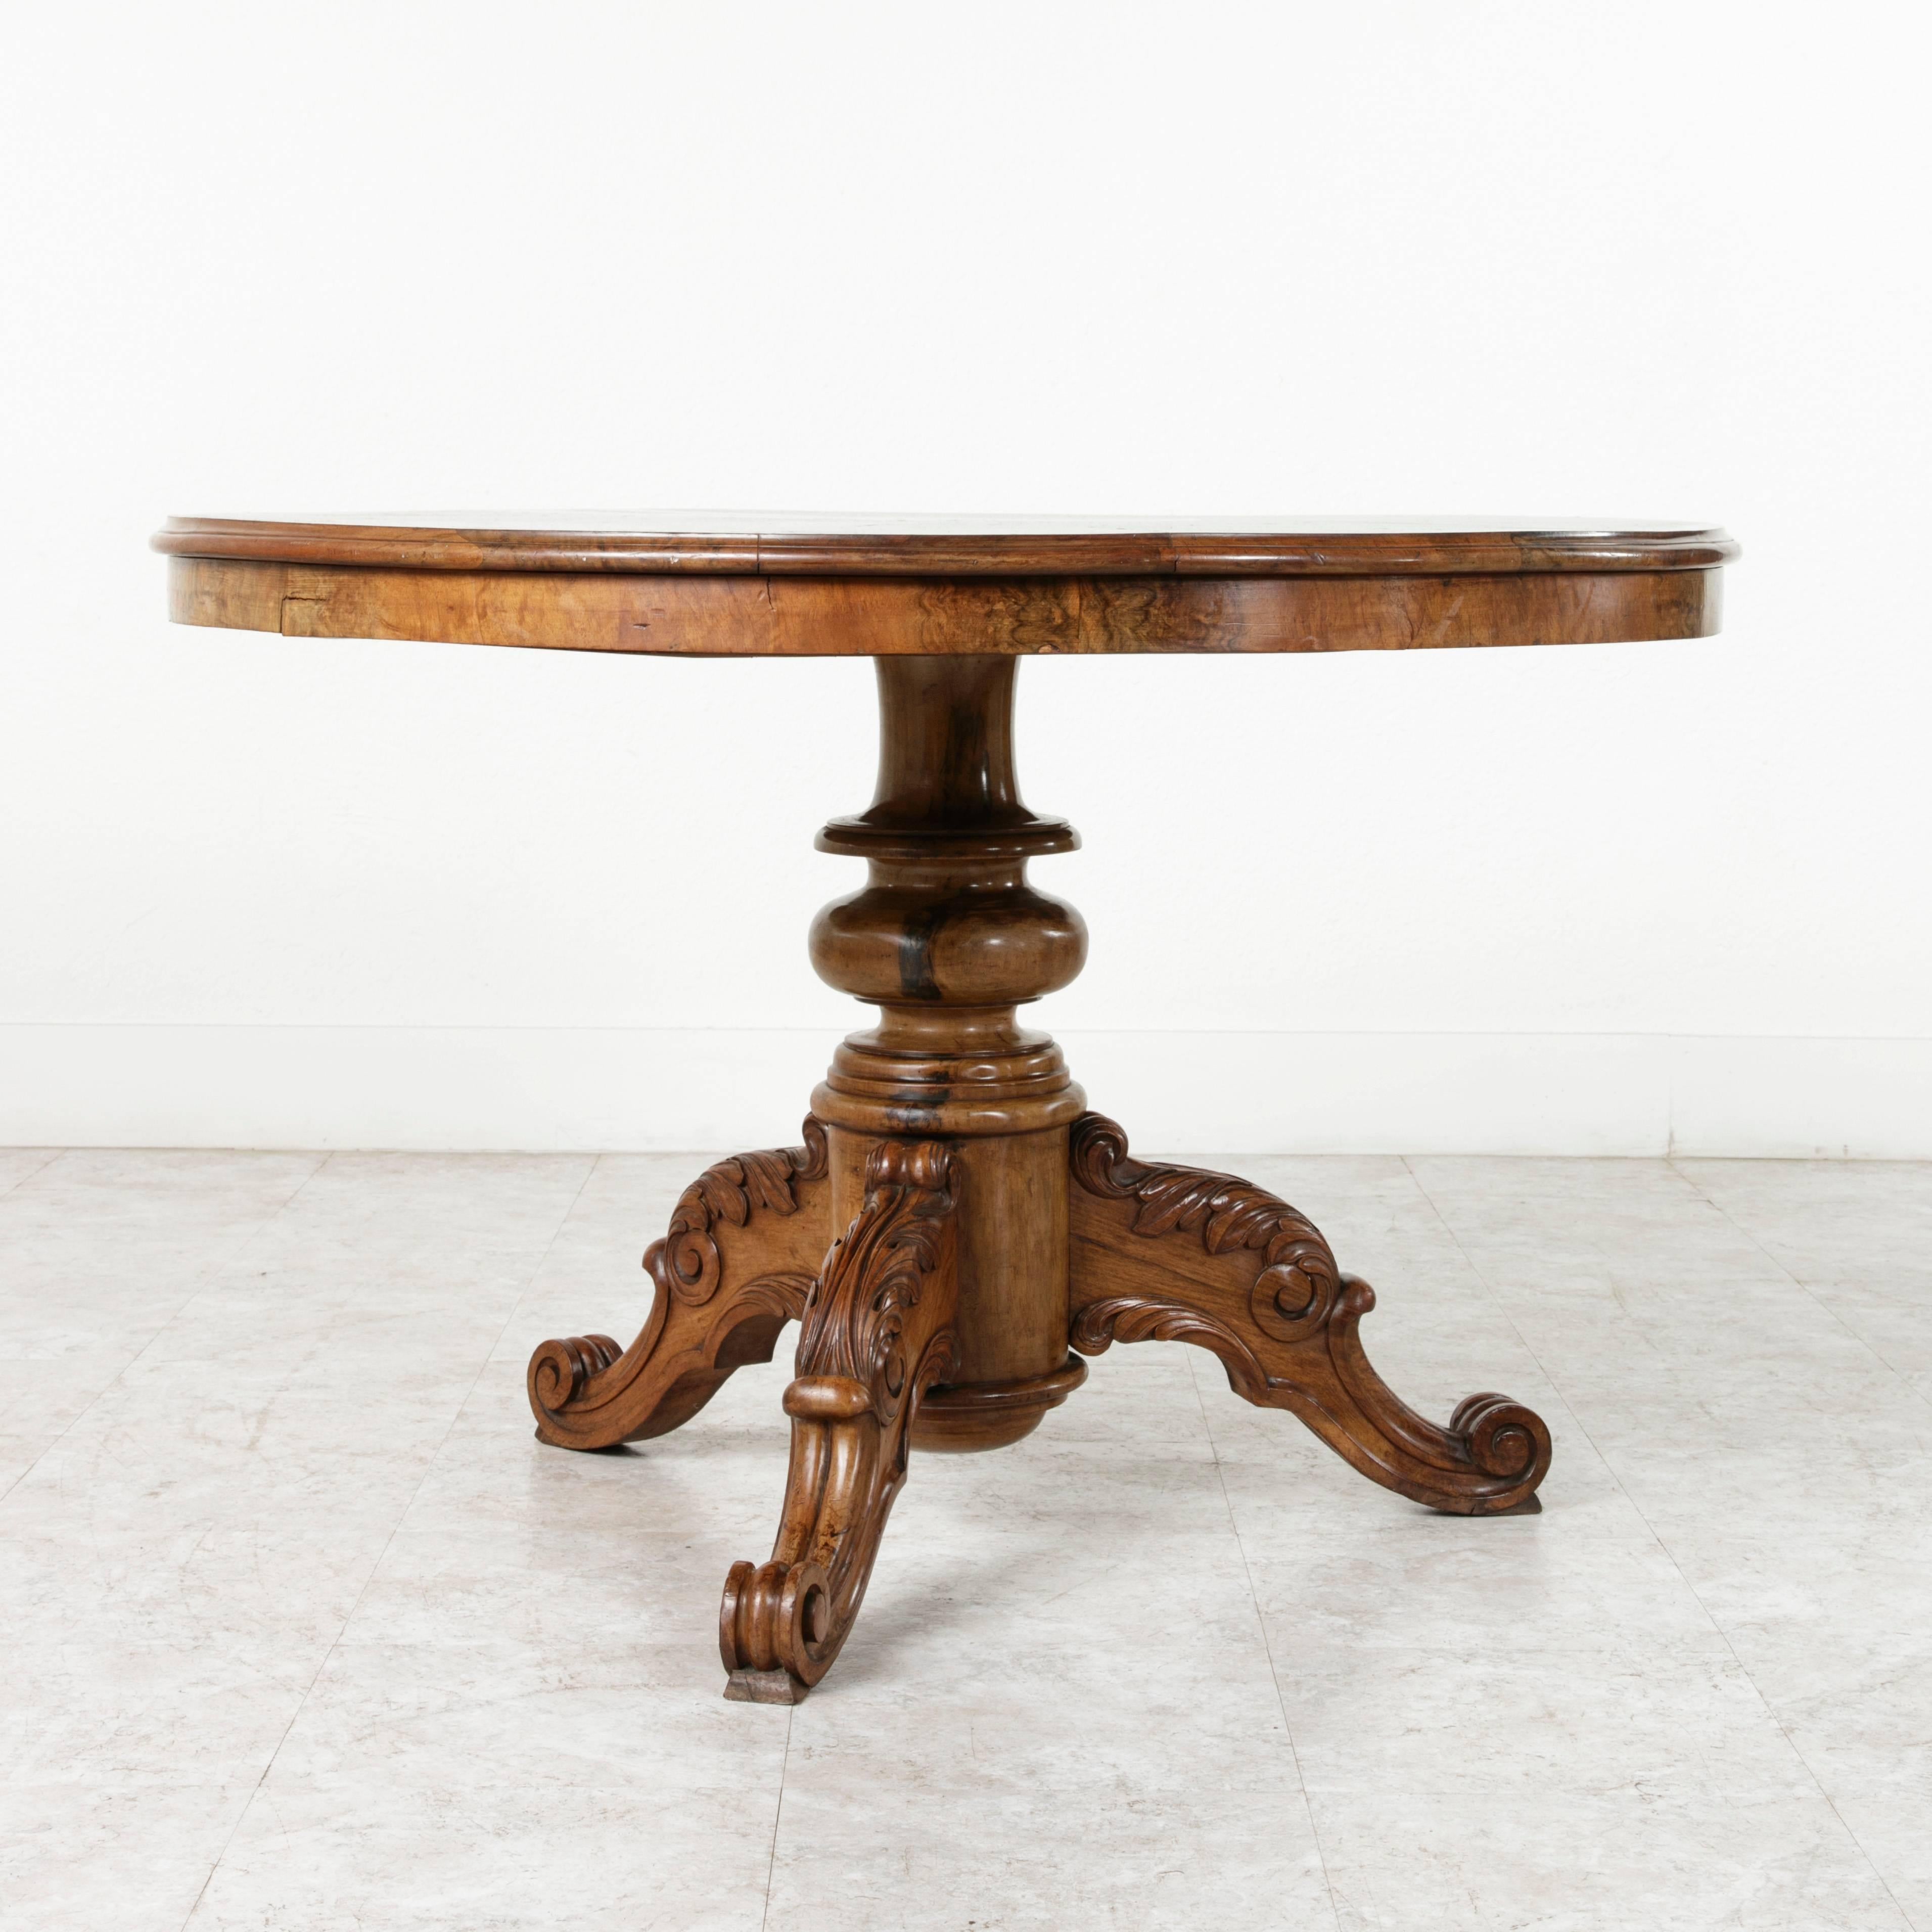 This Restauration period center table features a top of burled walnut perfectly book matched to create a seven point star. Its solid walnut pedestal base is intricately hand carved with scrolling acanthus. A simple latch can be turned to release and